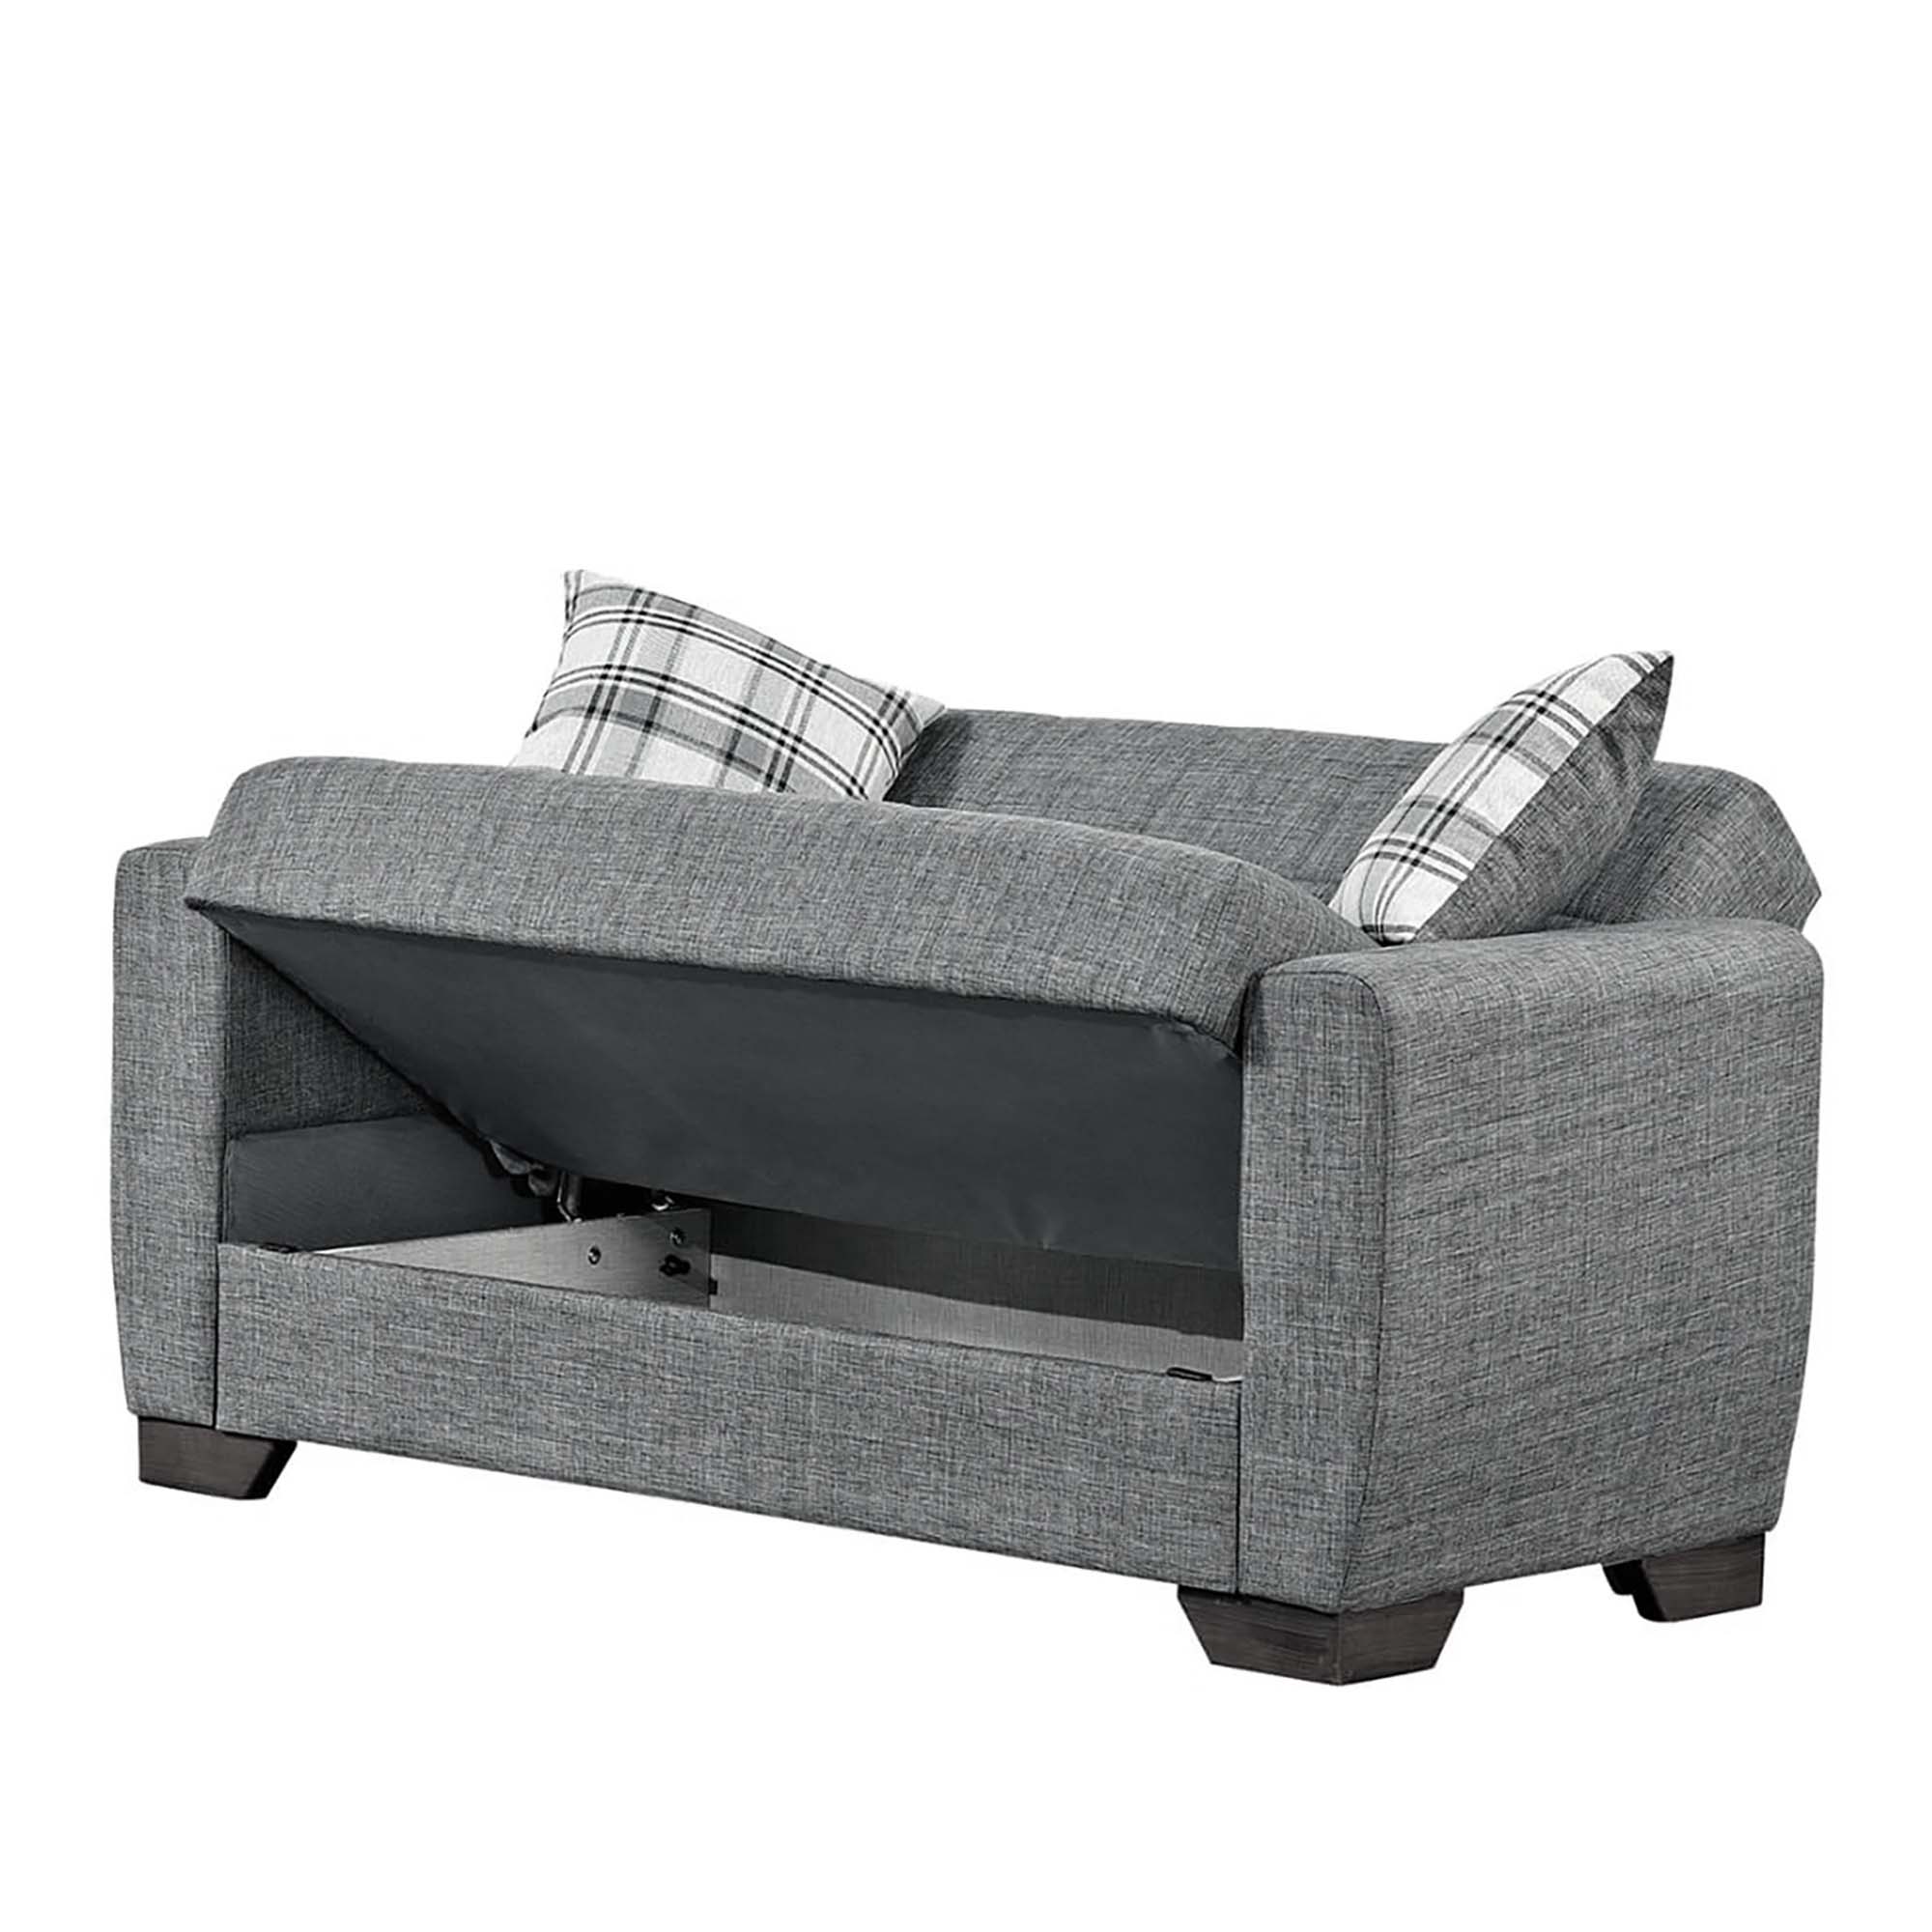 Barato Fabric Upholstery Convertible Love Seat with Storage